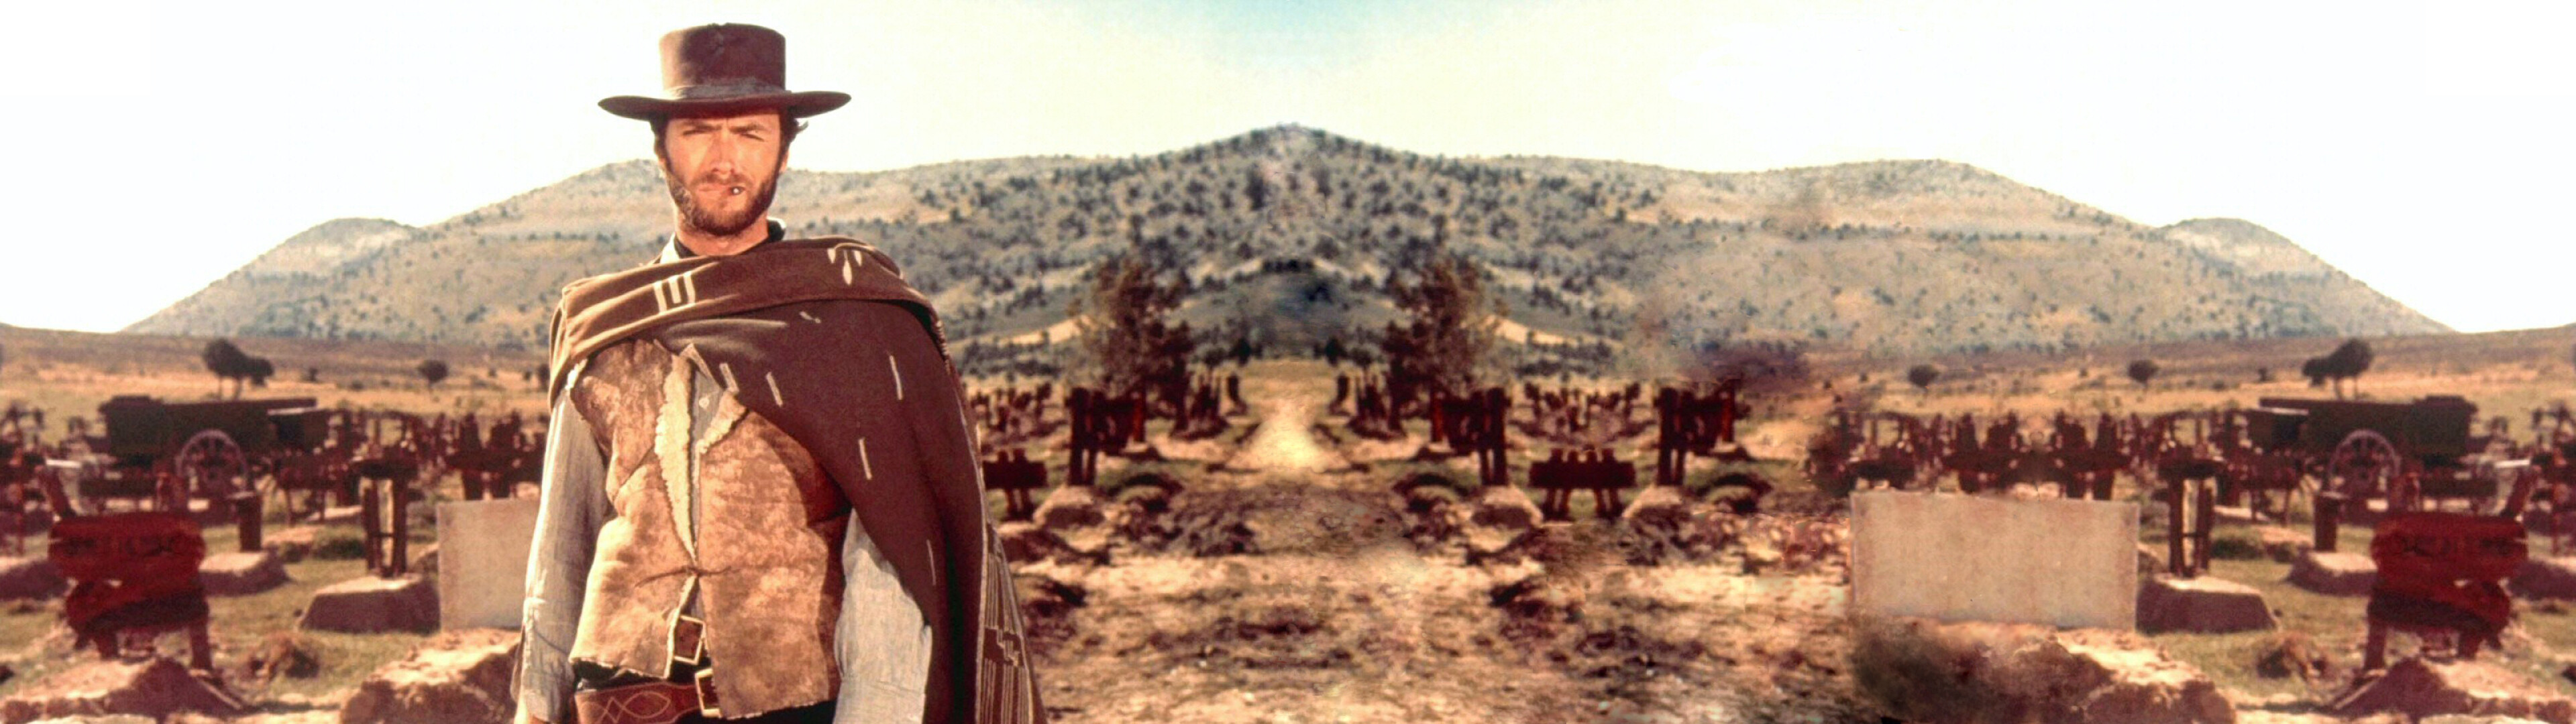 Clint Eastwood: "The Good The Bad And The Ugly", An Epic Spaghetti Western, Written By Screenwriters Agenore Incrocci And Furio Scarpelli, 1966. 3840x1080 Dual Screen Background.